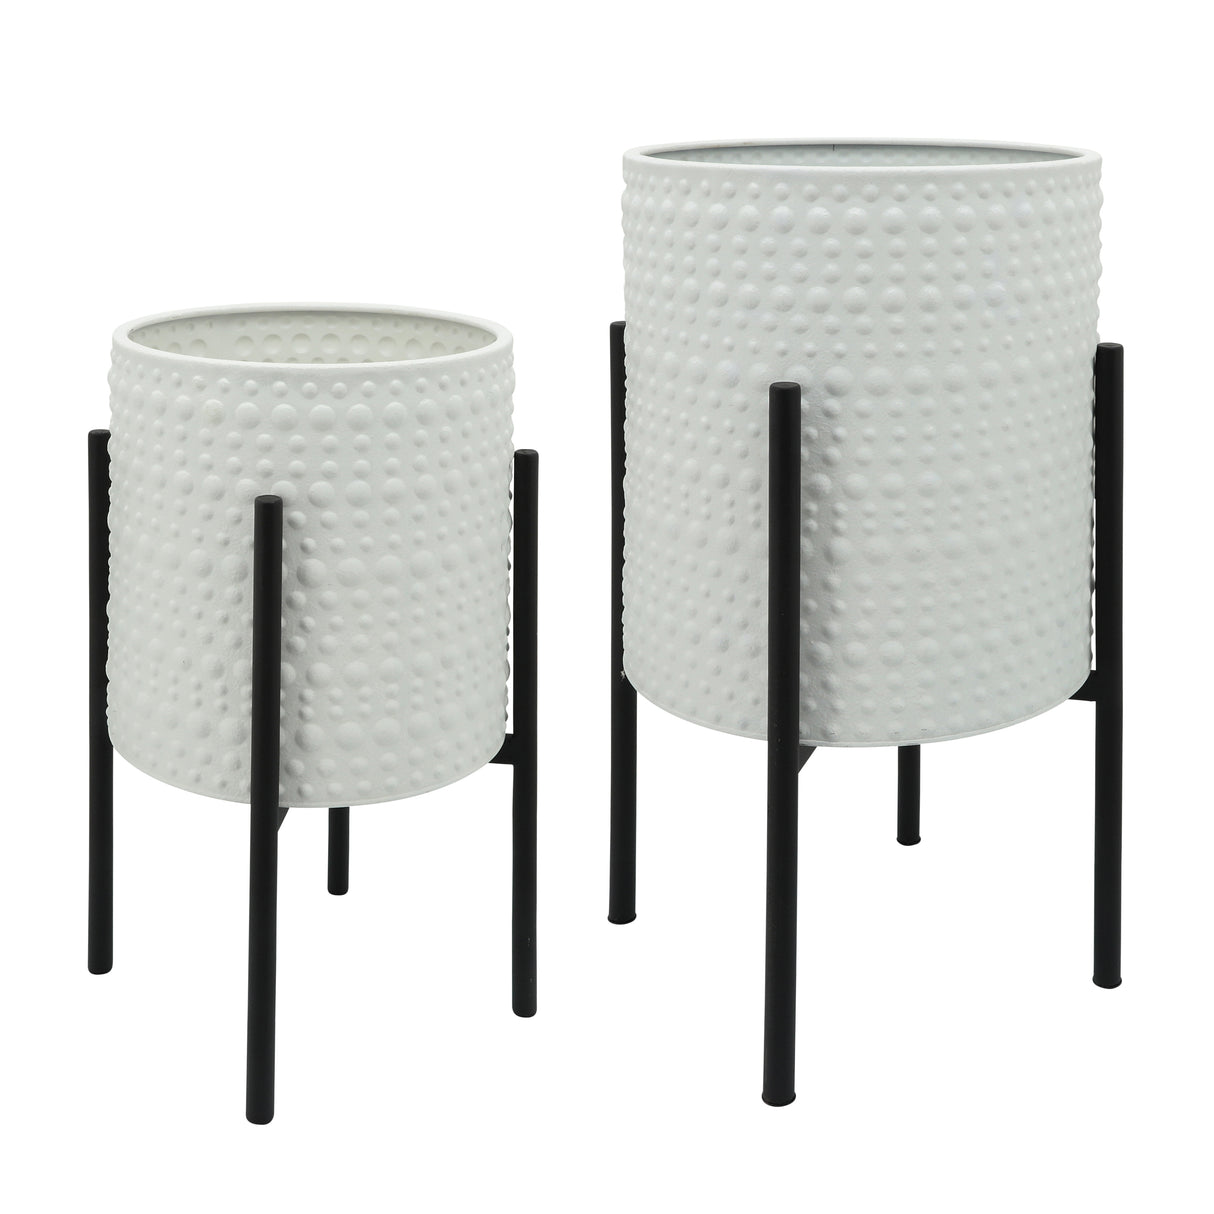 White Dotted Planters in Metal Stand- 2 Sizes